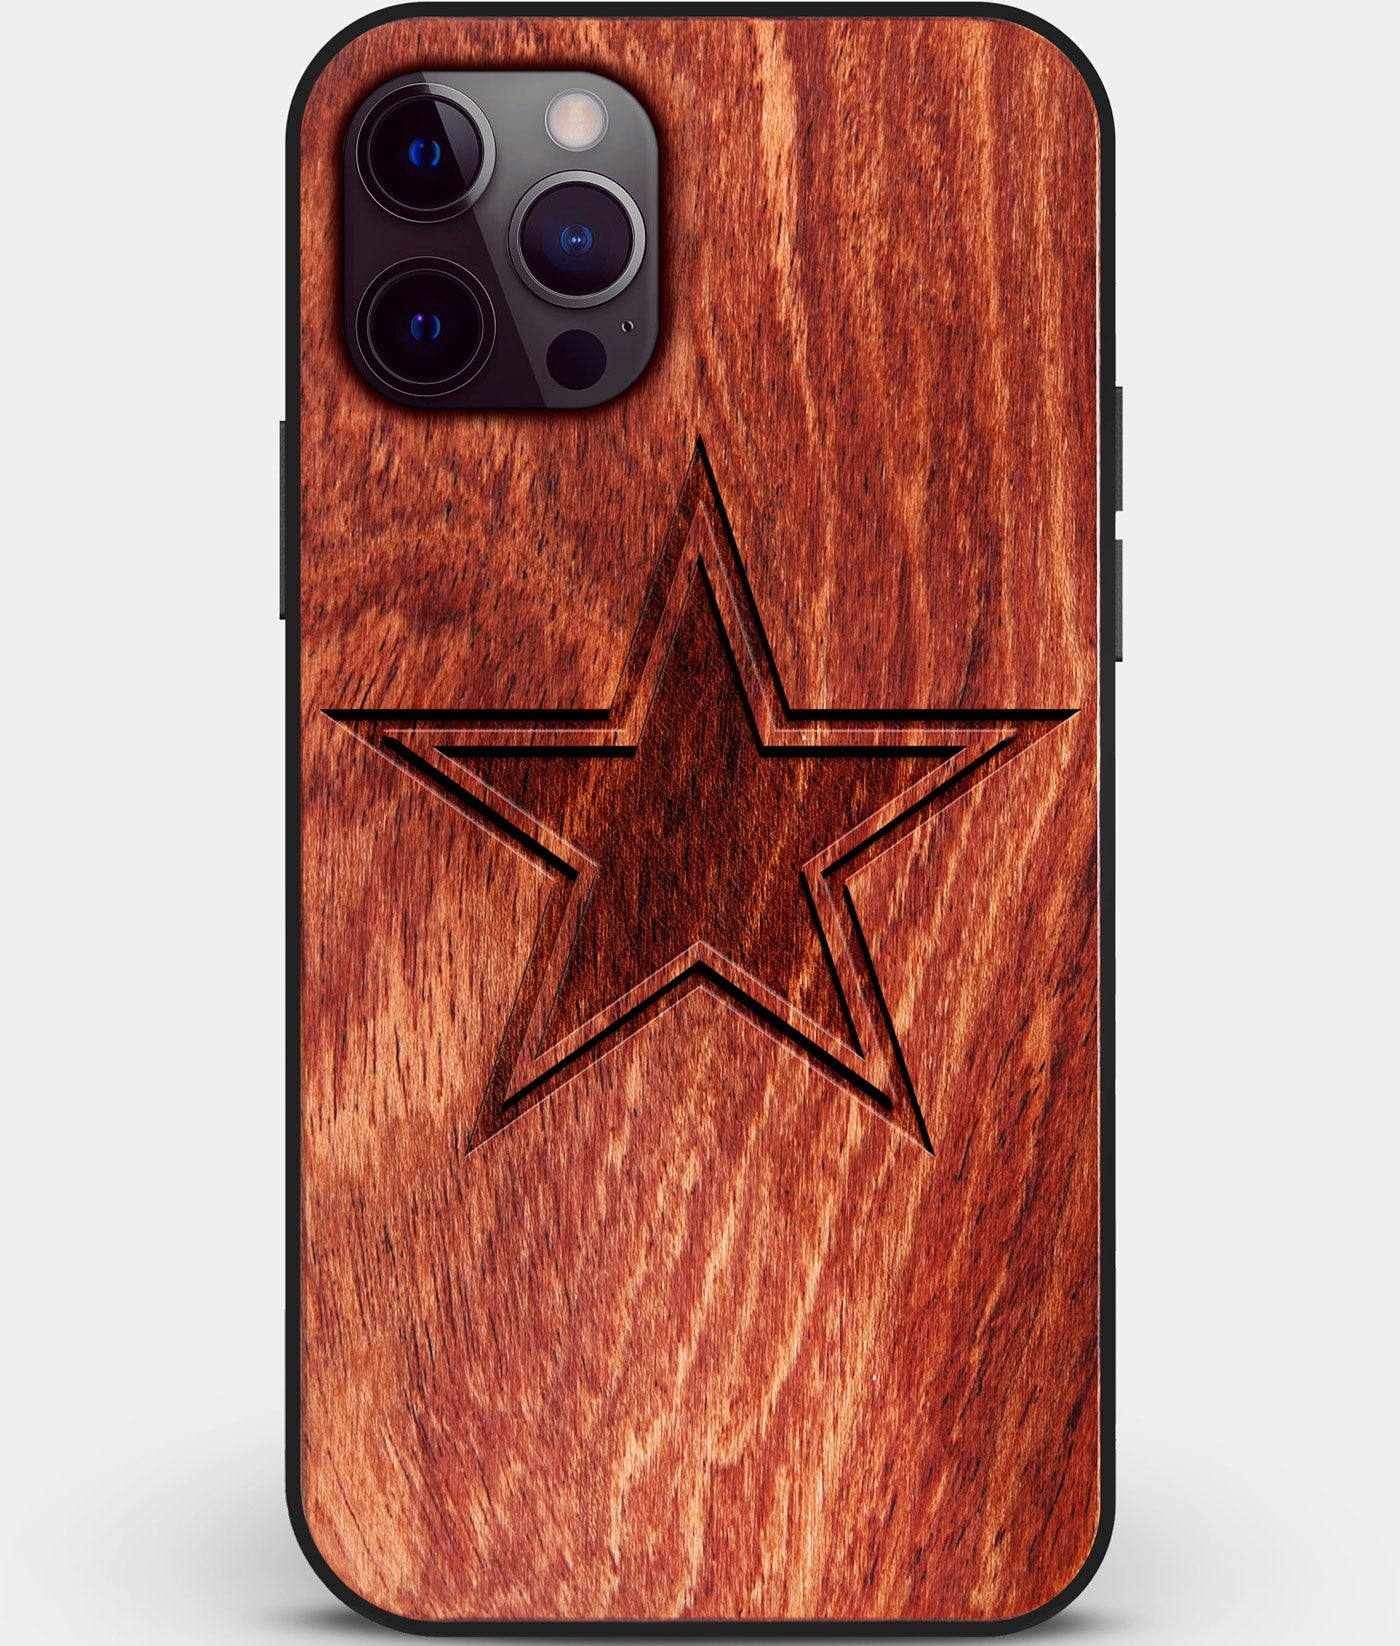 Custom Carved Wood Dallas Cowboys iPhone 12 Pro Case | Personalized Mahogany Wood Dallas Cowboys Cover, Birthday Gift, Gifts For Him, Monogrammed Gift For Fan | by Engraved In Nature